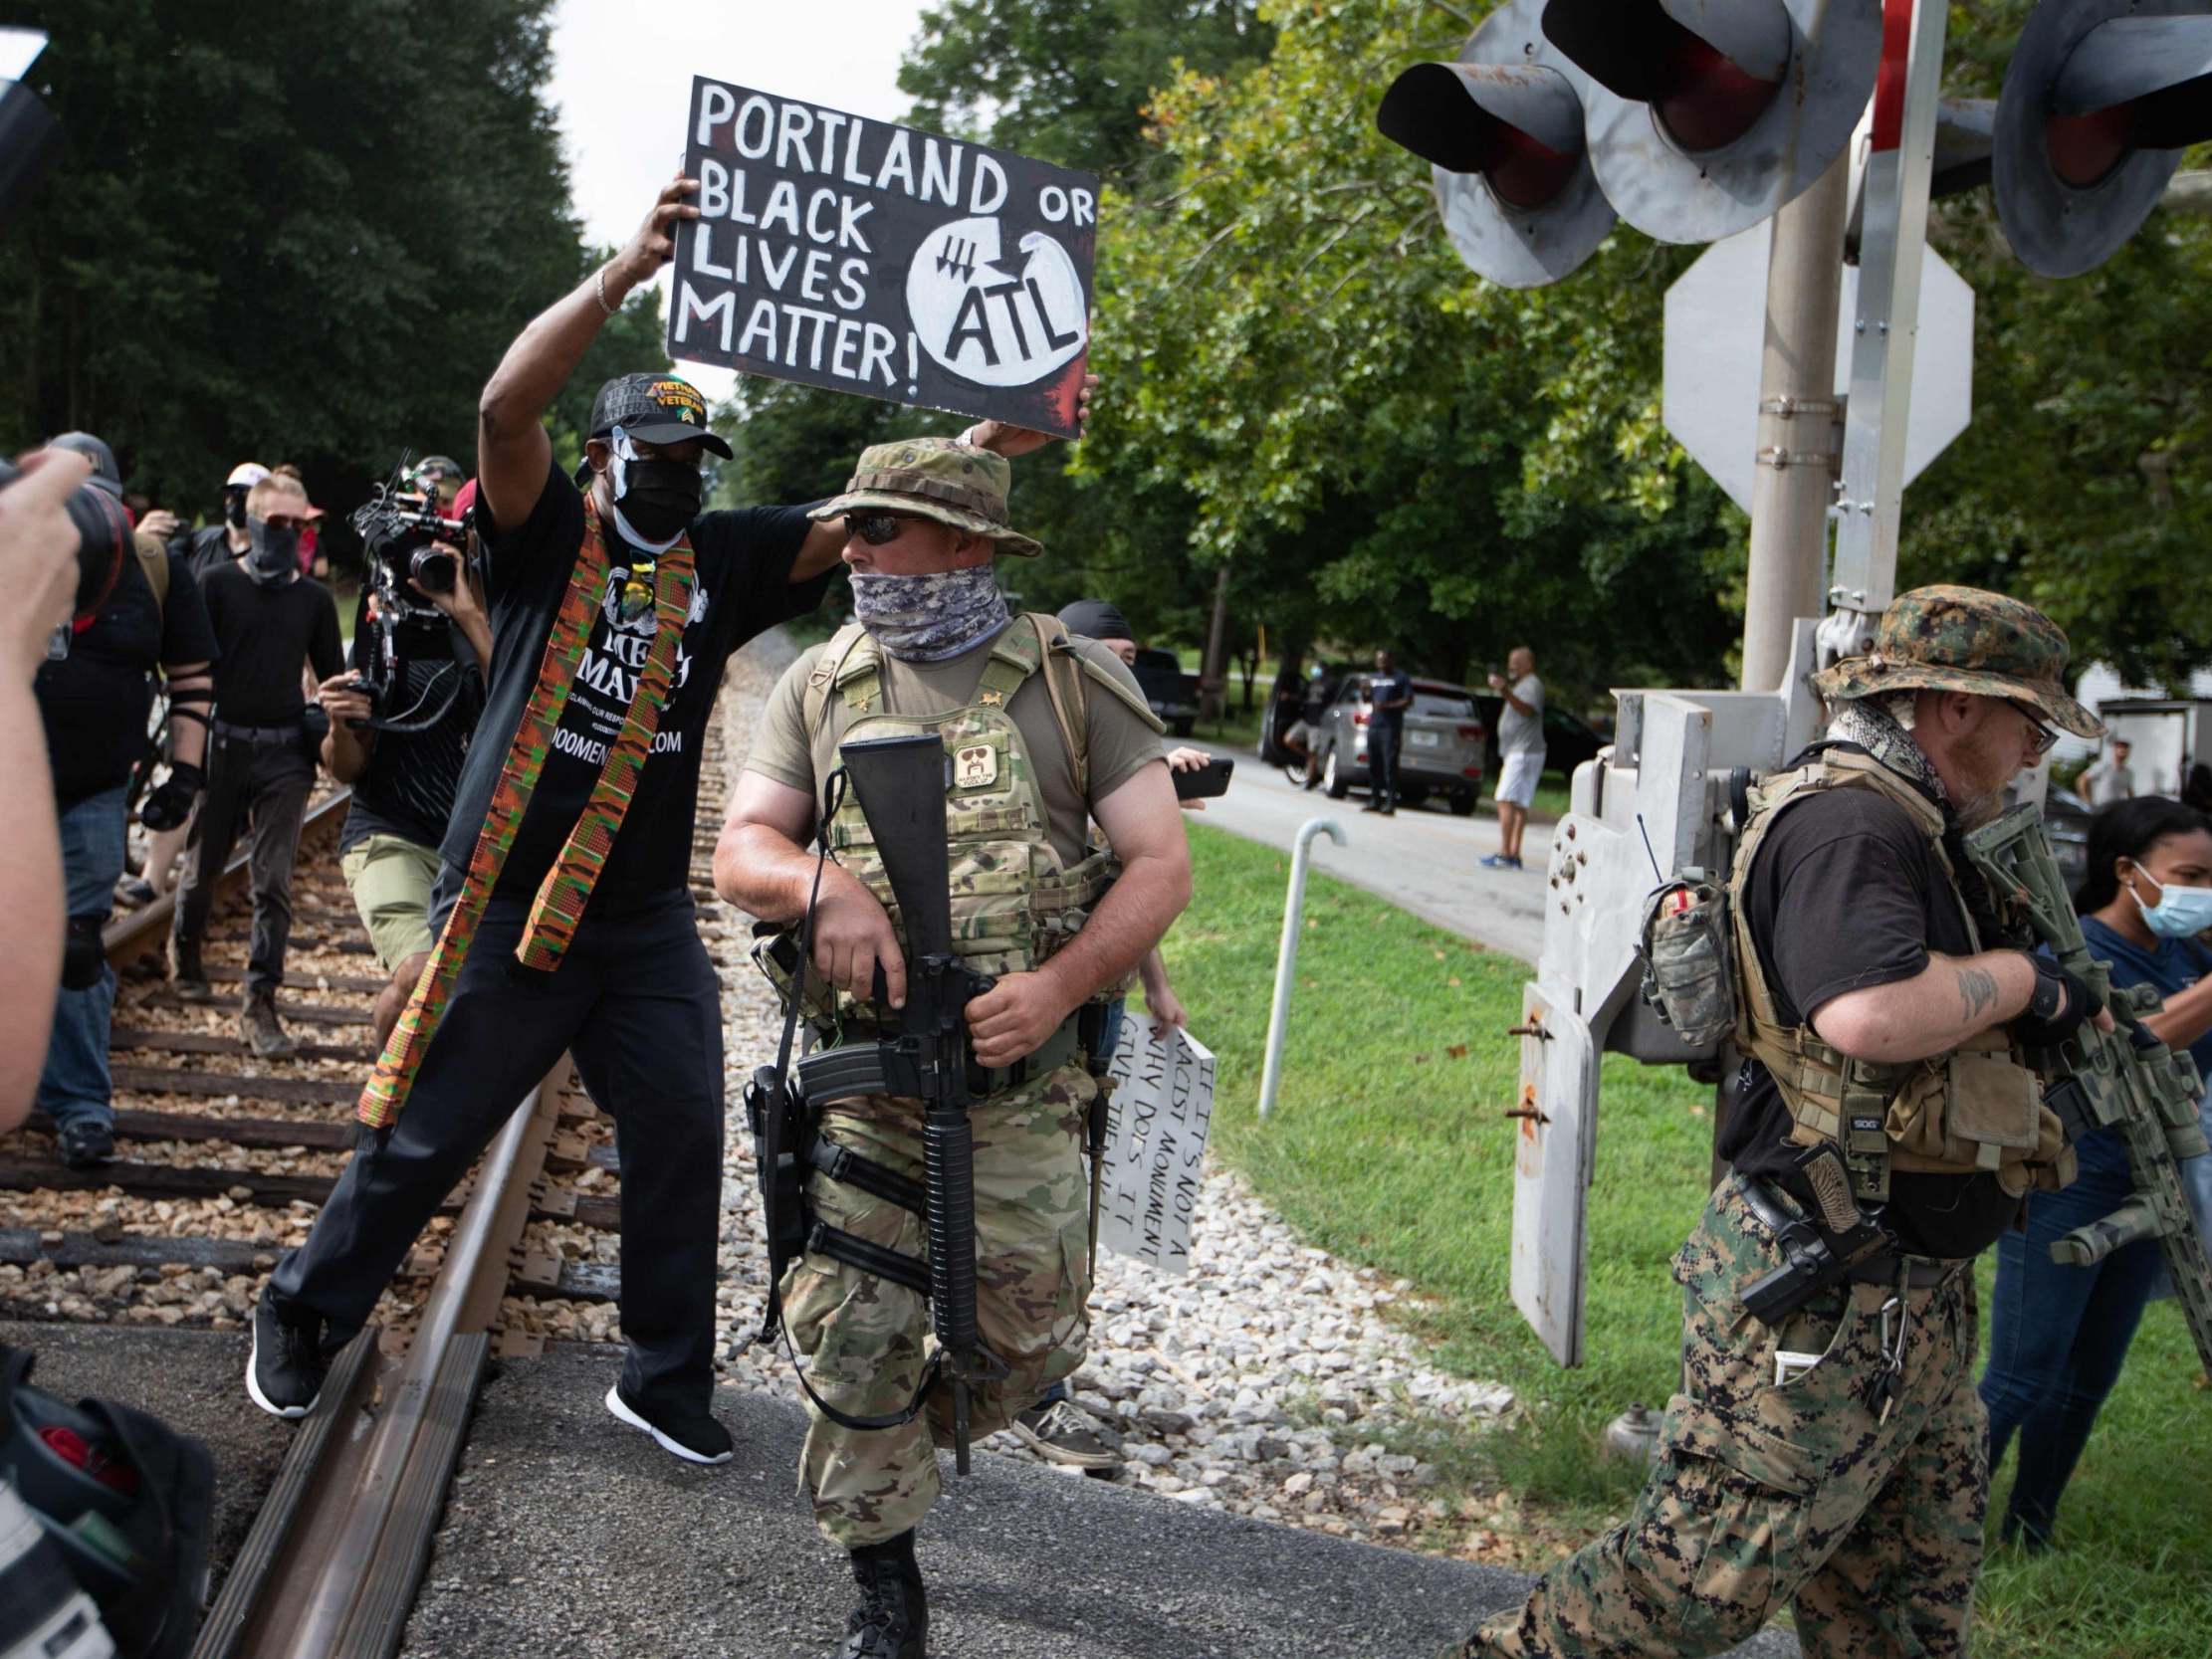 Violent clashes across the US between far-right and counter protesters